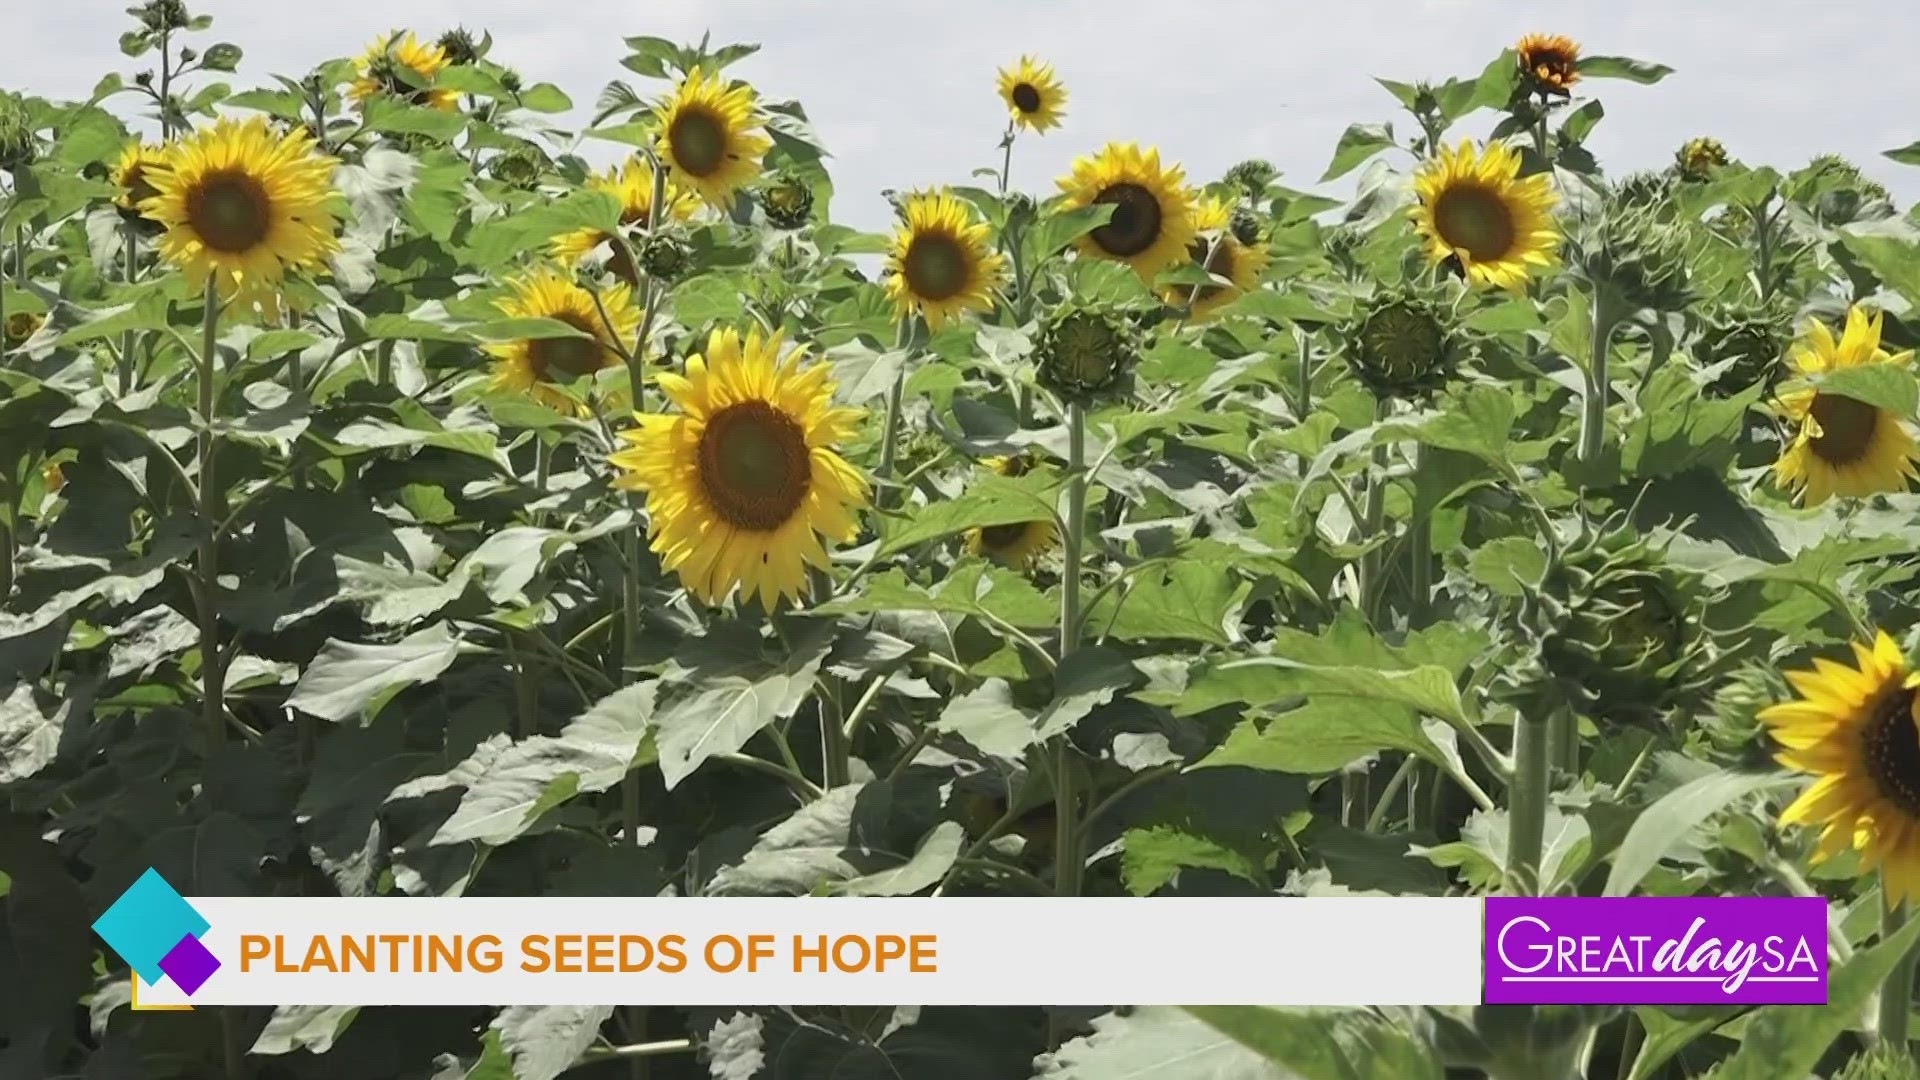 Brian Billeck is continuing his tradition of planting 10 acres of sunflowers in honor of his son who passed away from cancer.